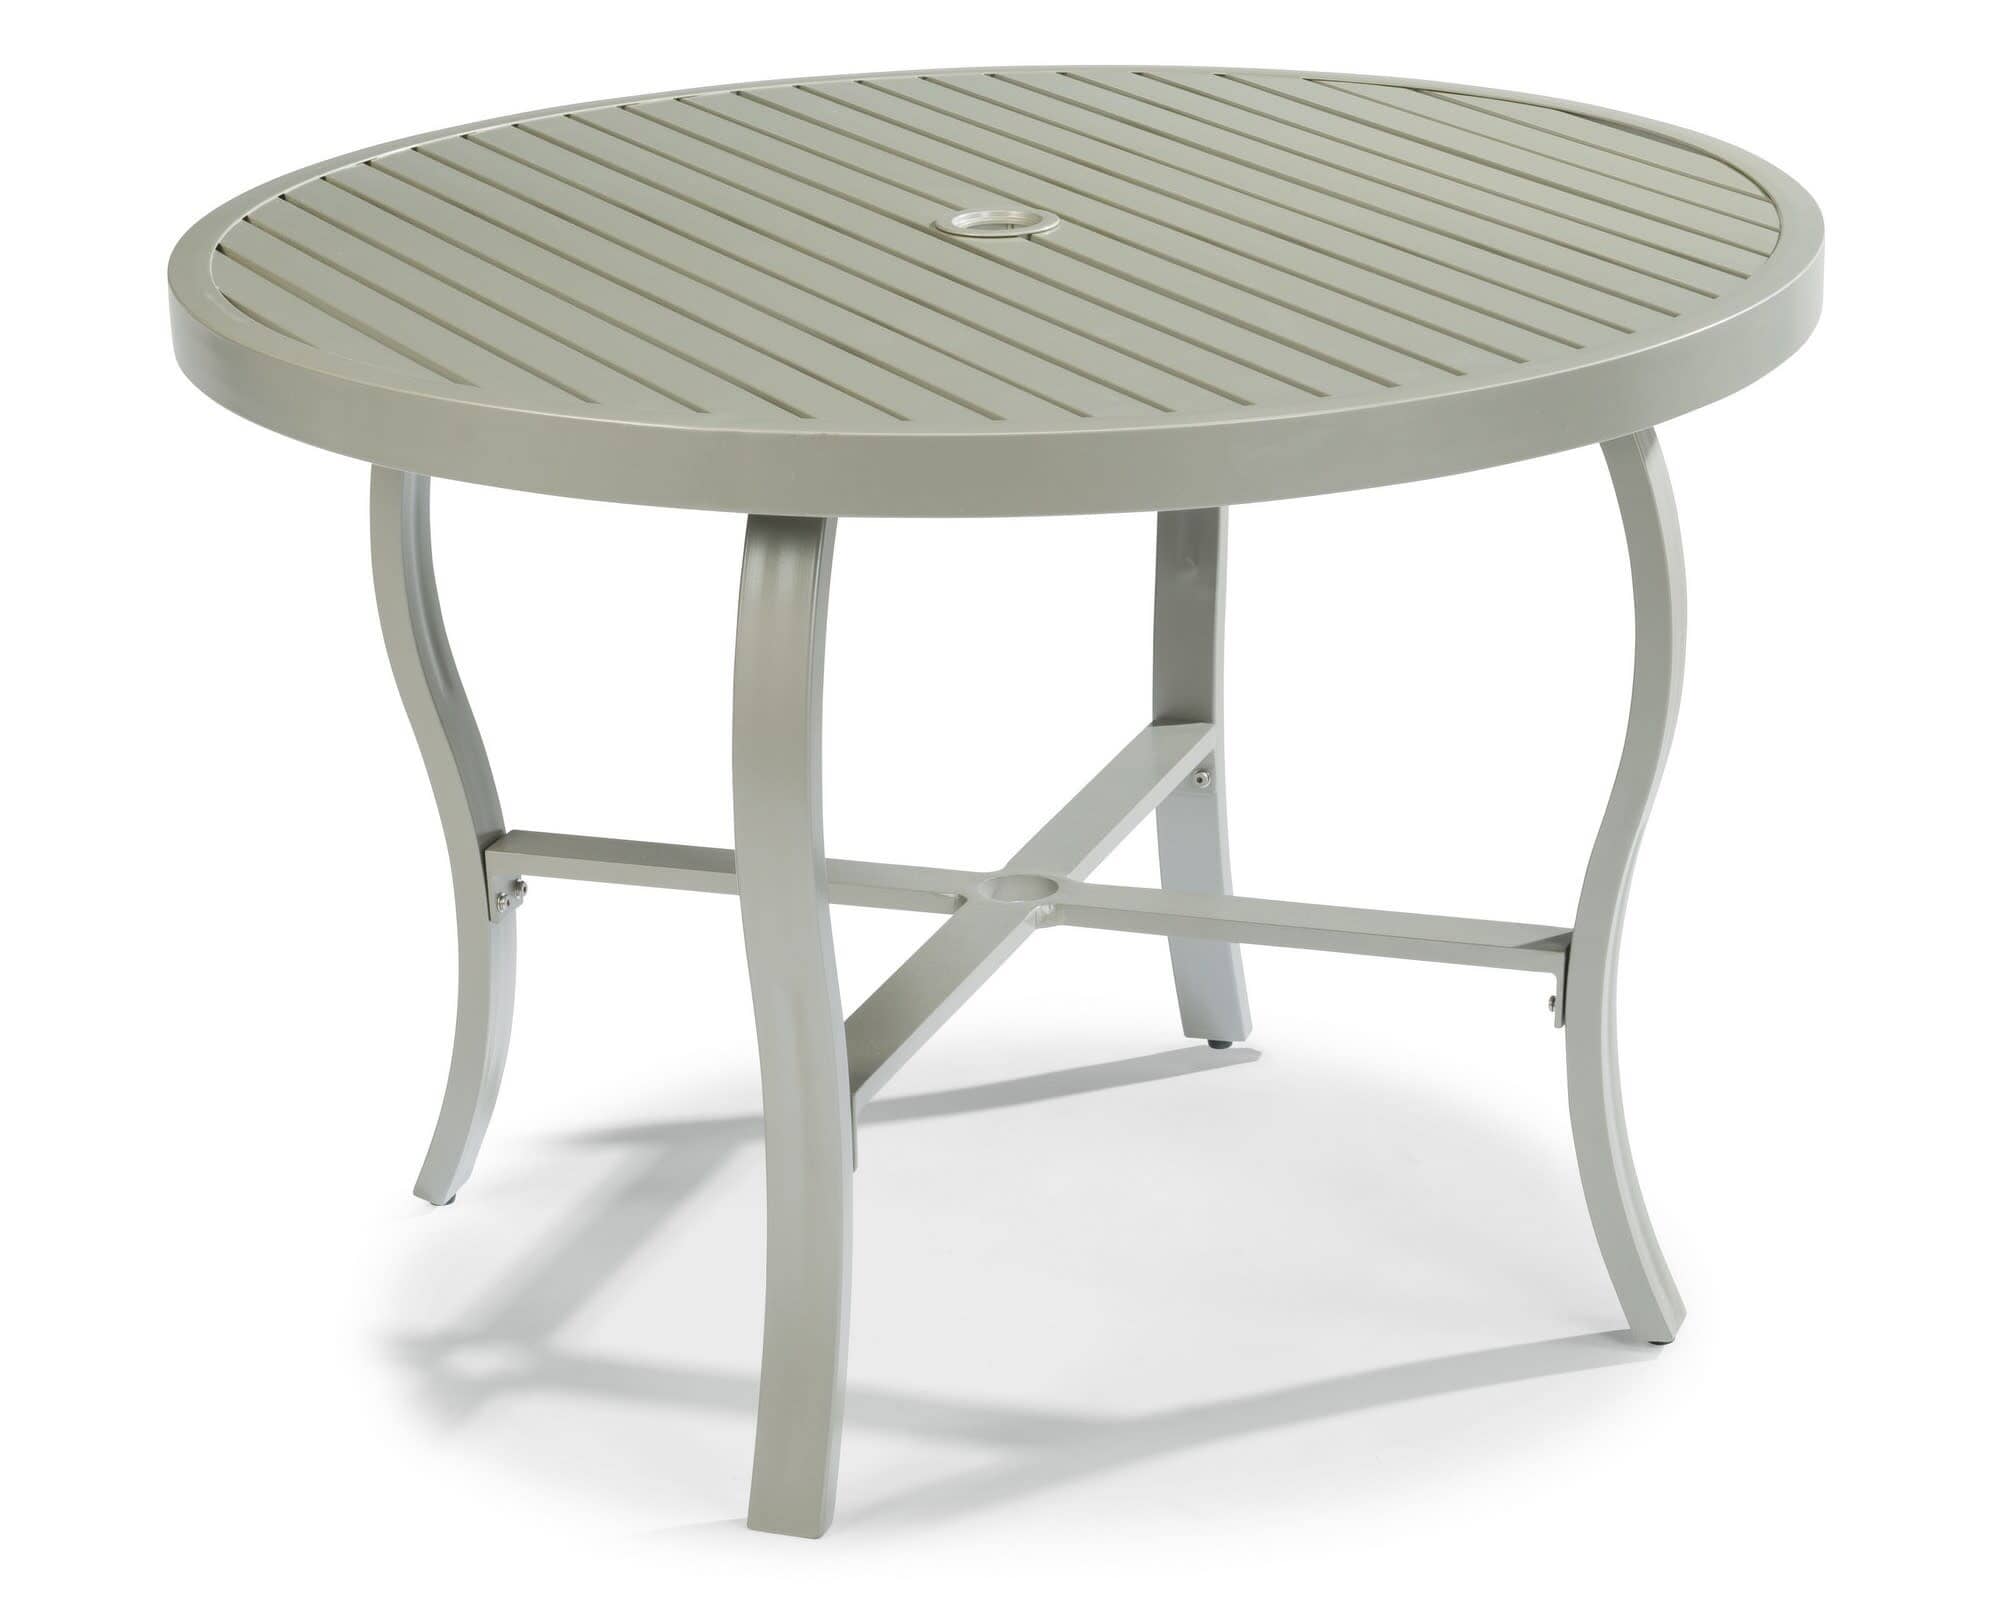 Modern & Contemporary Outdoor Dining Table By Captiva Outdoor Dining Set Captiva